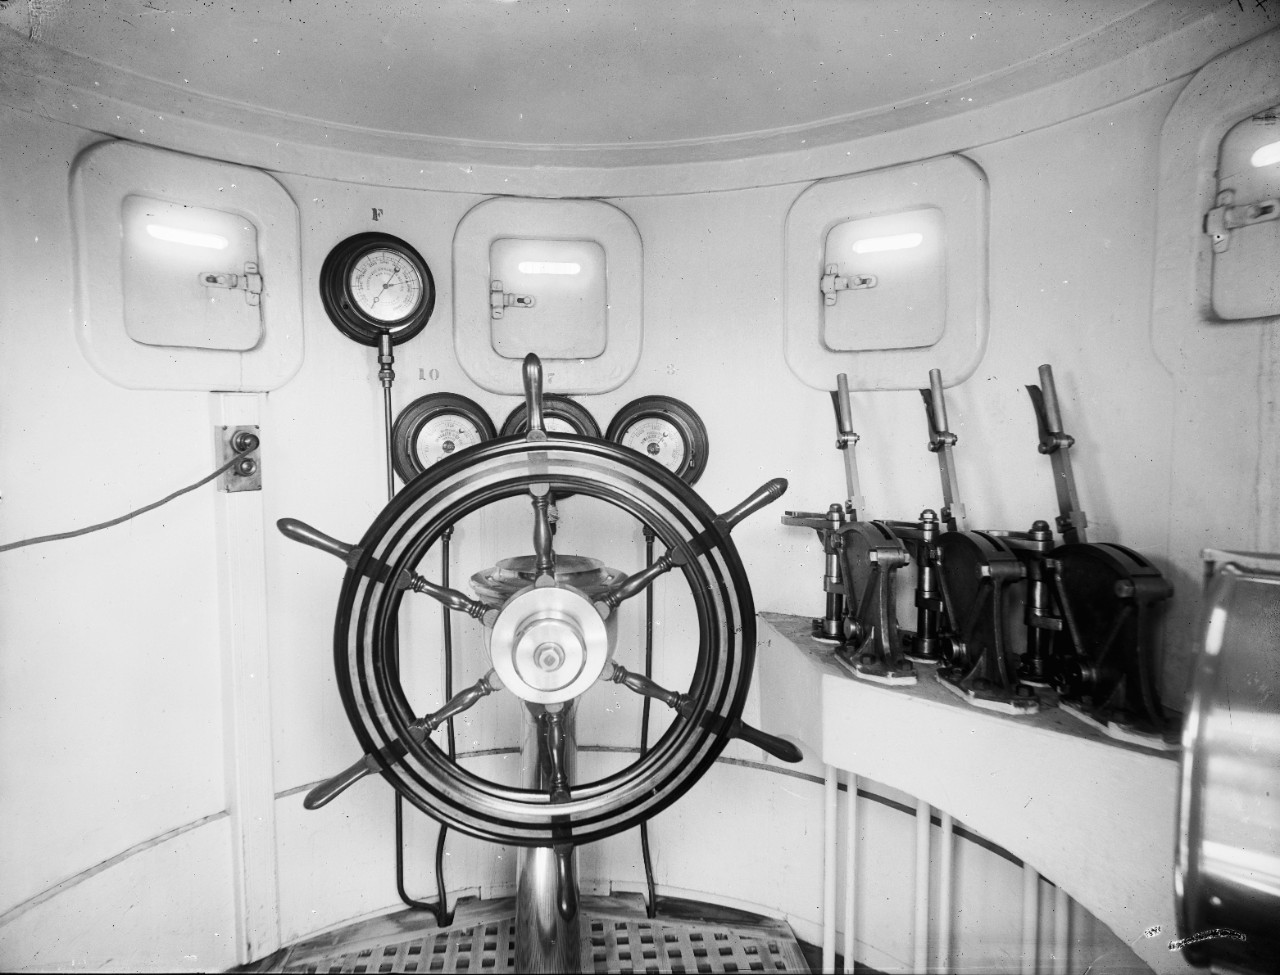 LC-DIG-DET-4a13993:  USS Vesuvius, 1890s.    U.S. Navy dynamite gun cruiser USS Vesuvius, interior view of the conning tower.  Photographed by Detroit Publishing, 1890-1901.  Courtesy of the Library of Congress.   (2015/6/12).